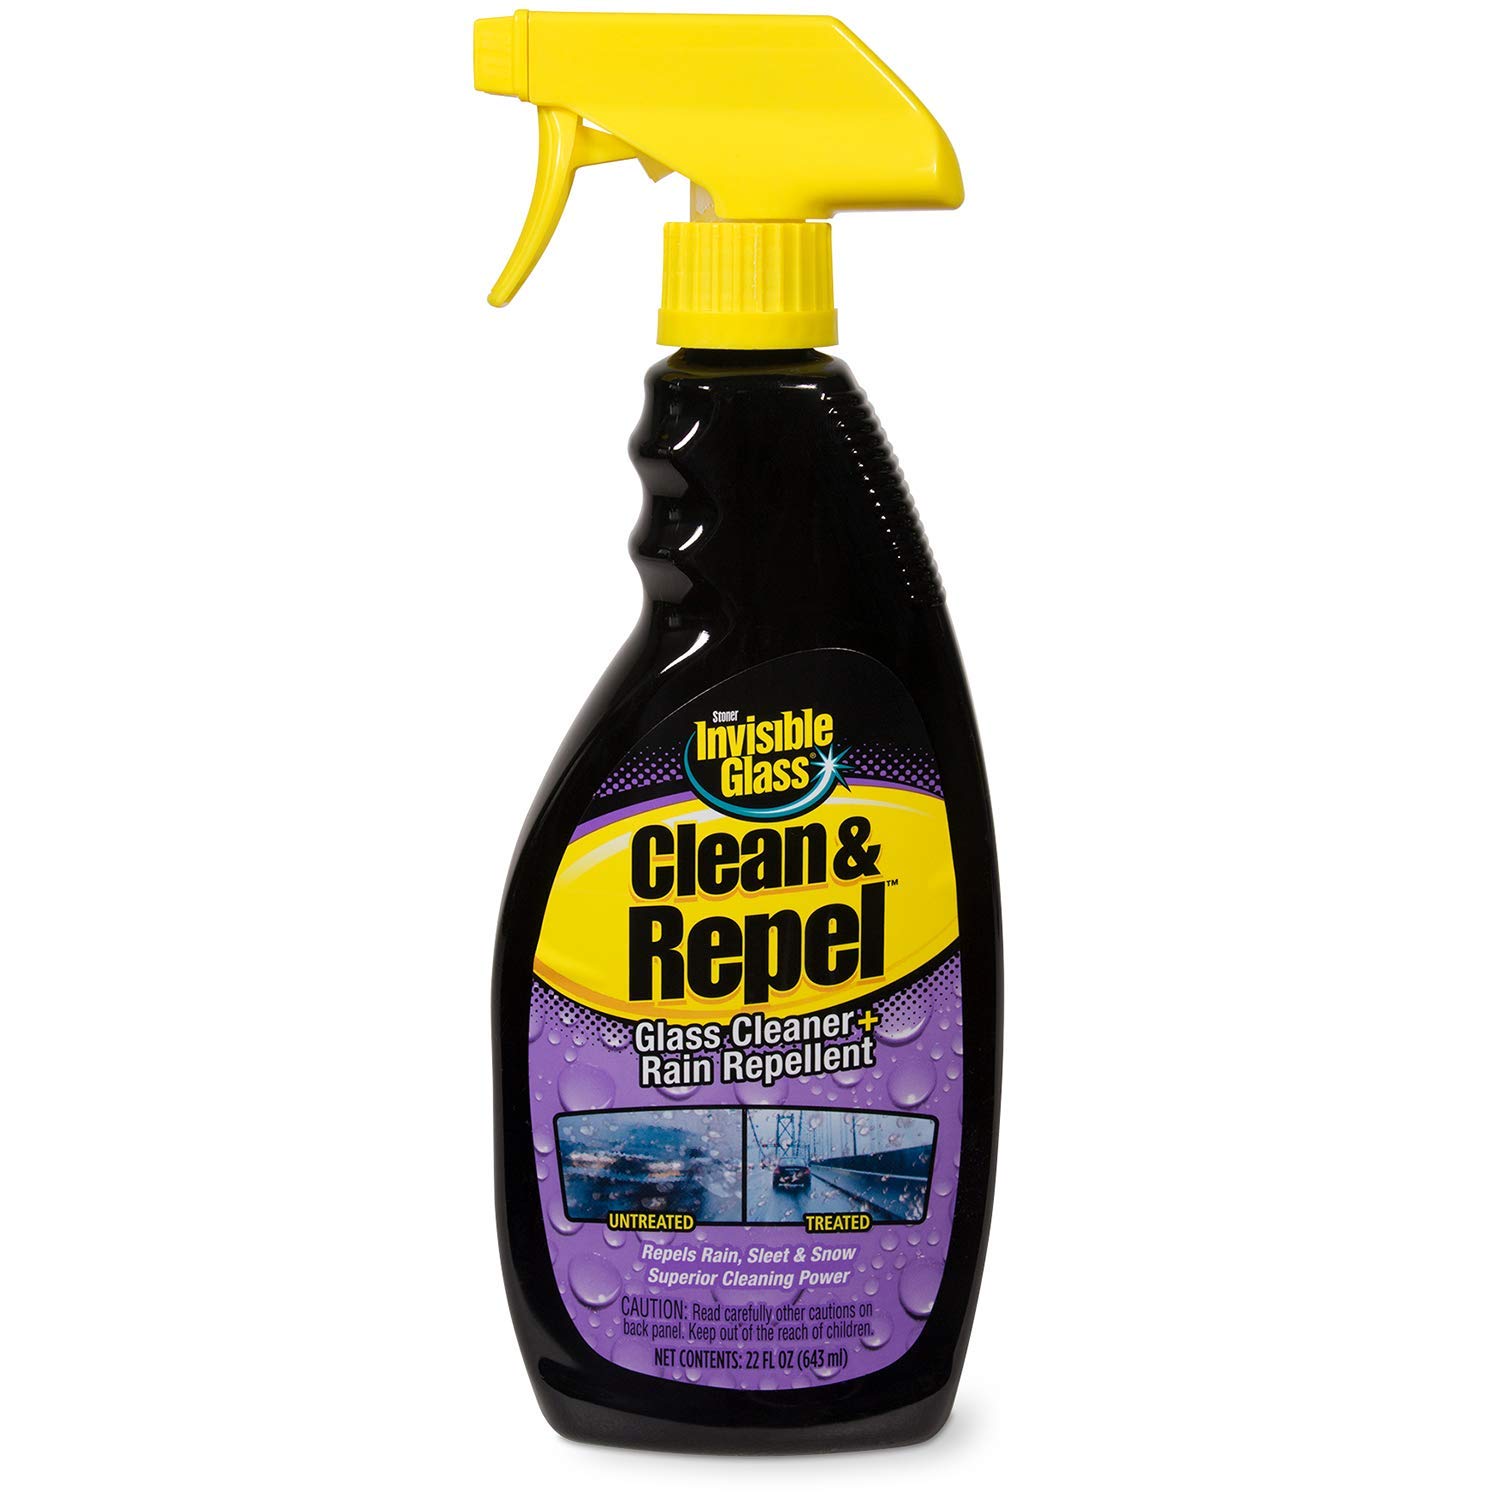 windshield water repellent - Invisible Glass Clean and Repel